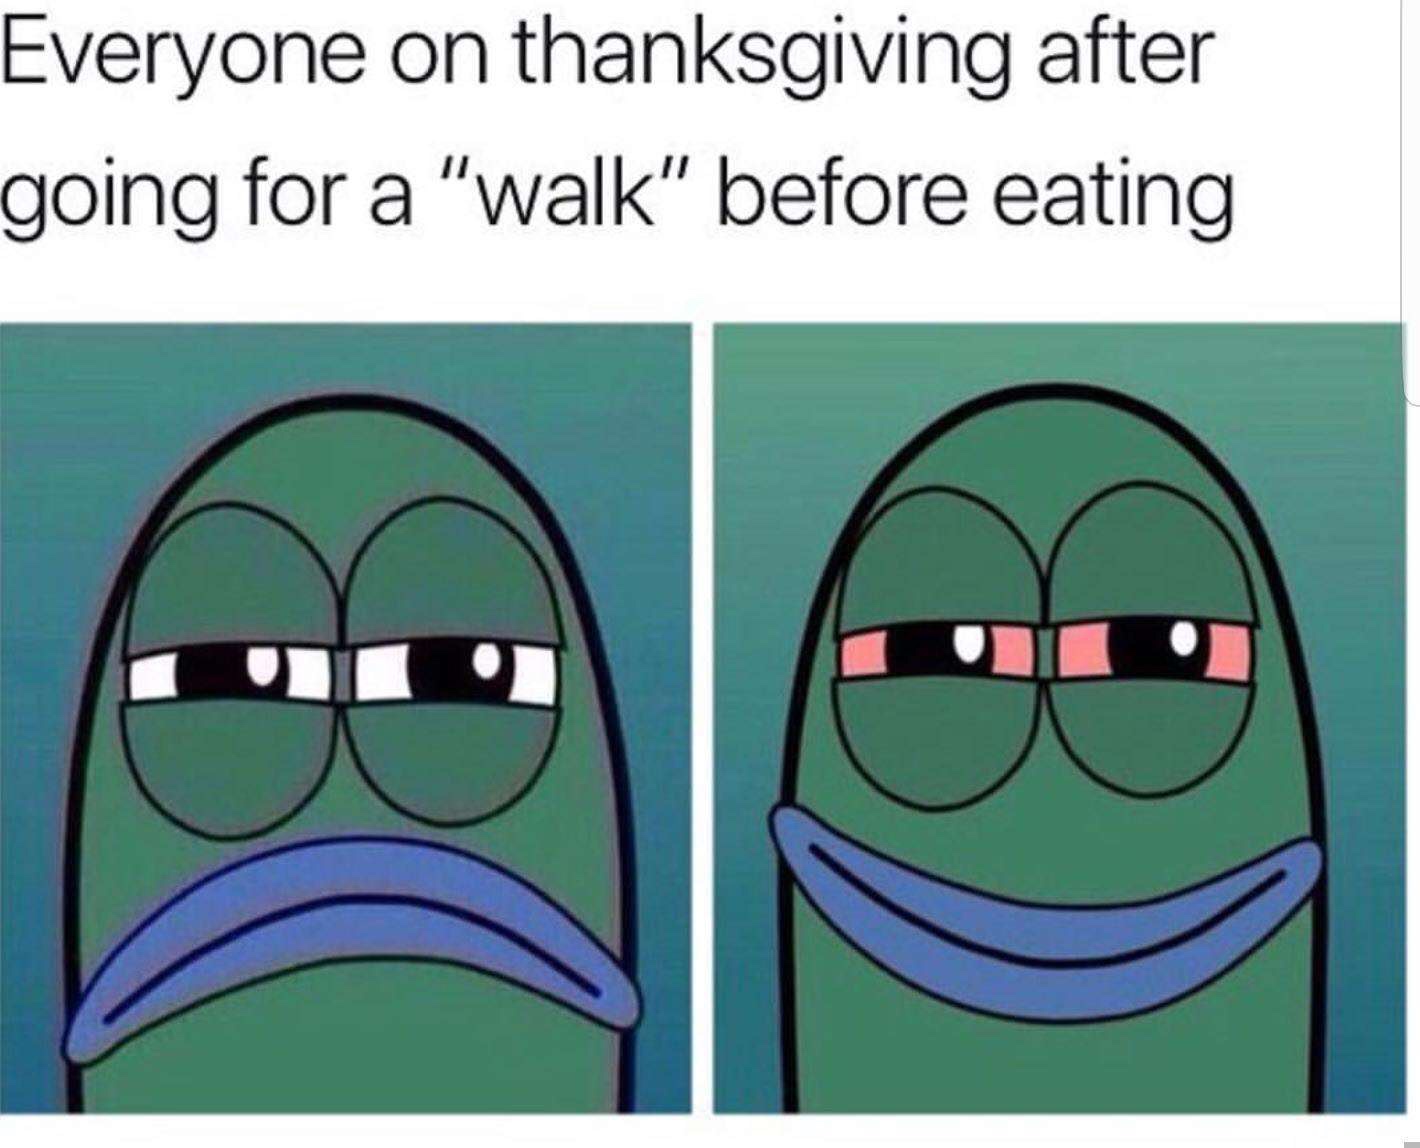 Everyone on thanksgiving after going for a "walk" before eating